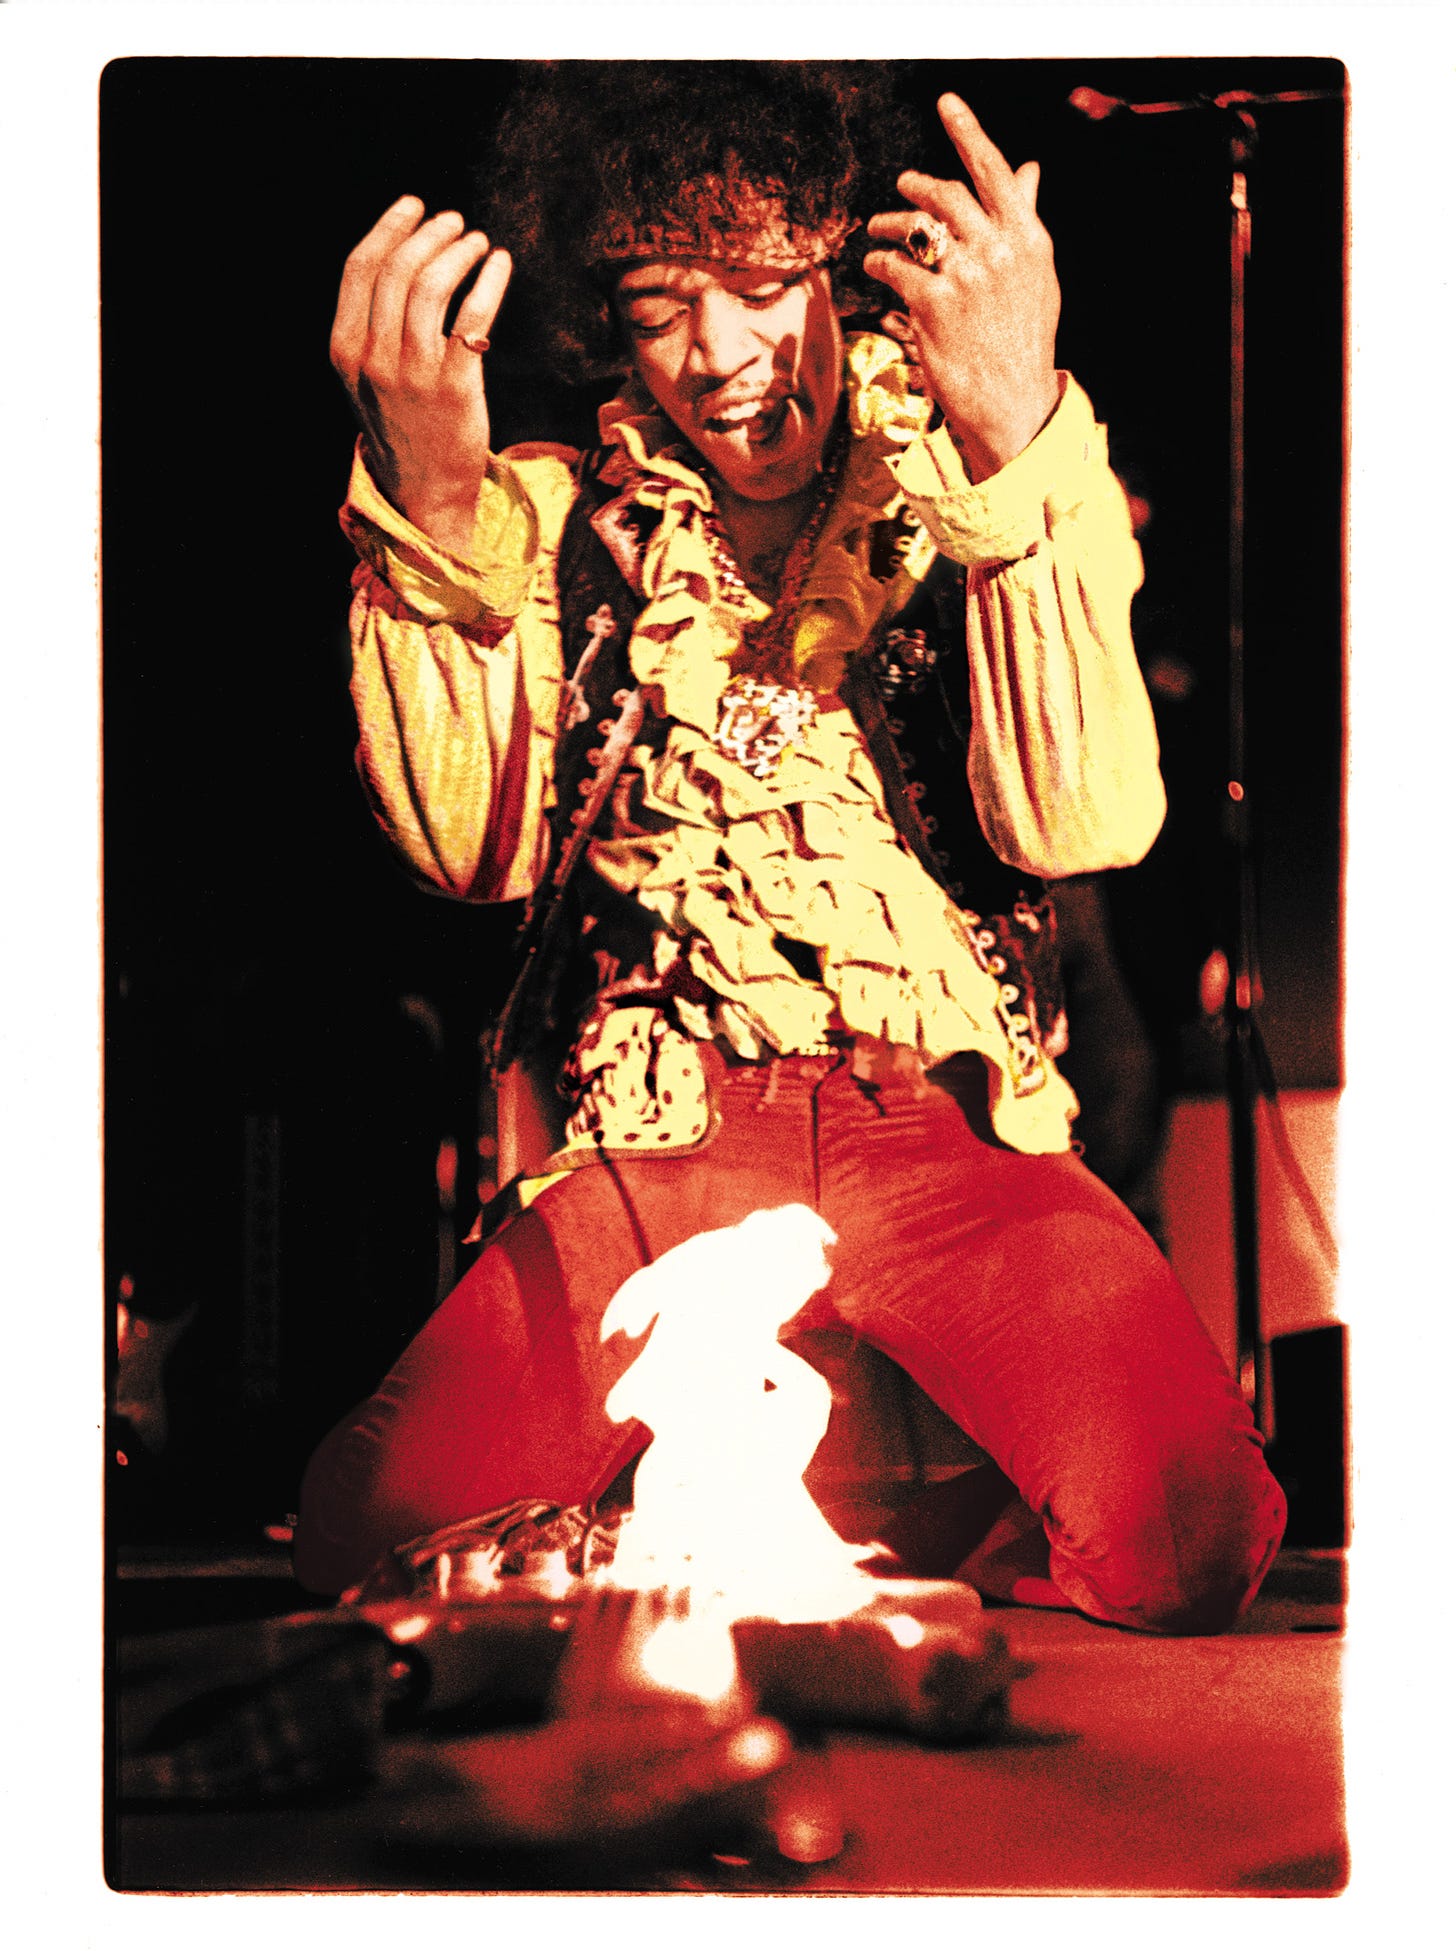 Photograph of Jimi Hendrix burning his guitar by Ed Caraeff.